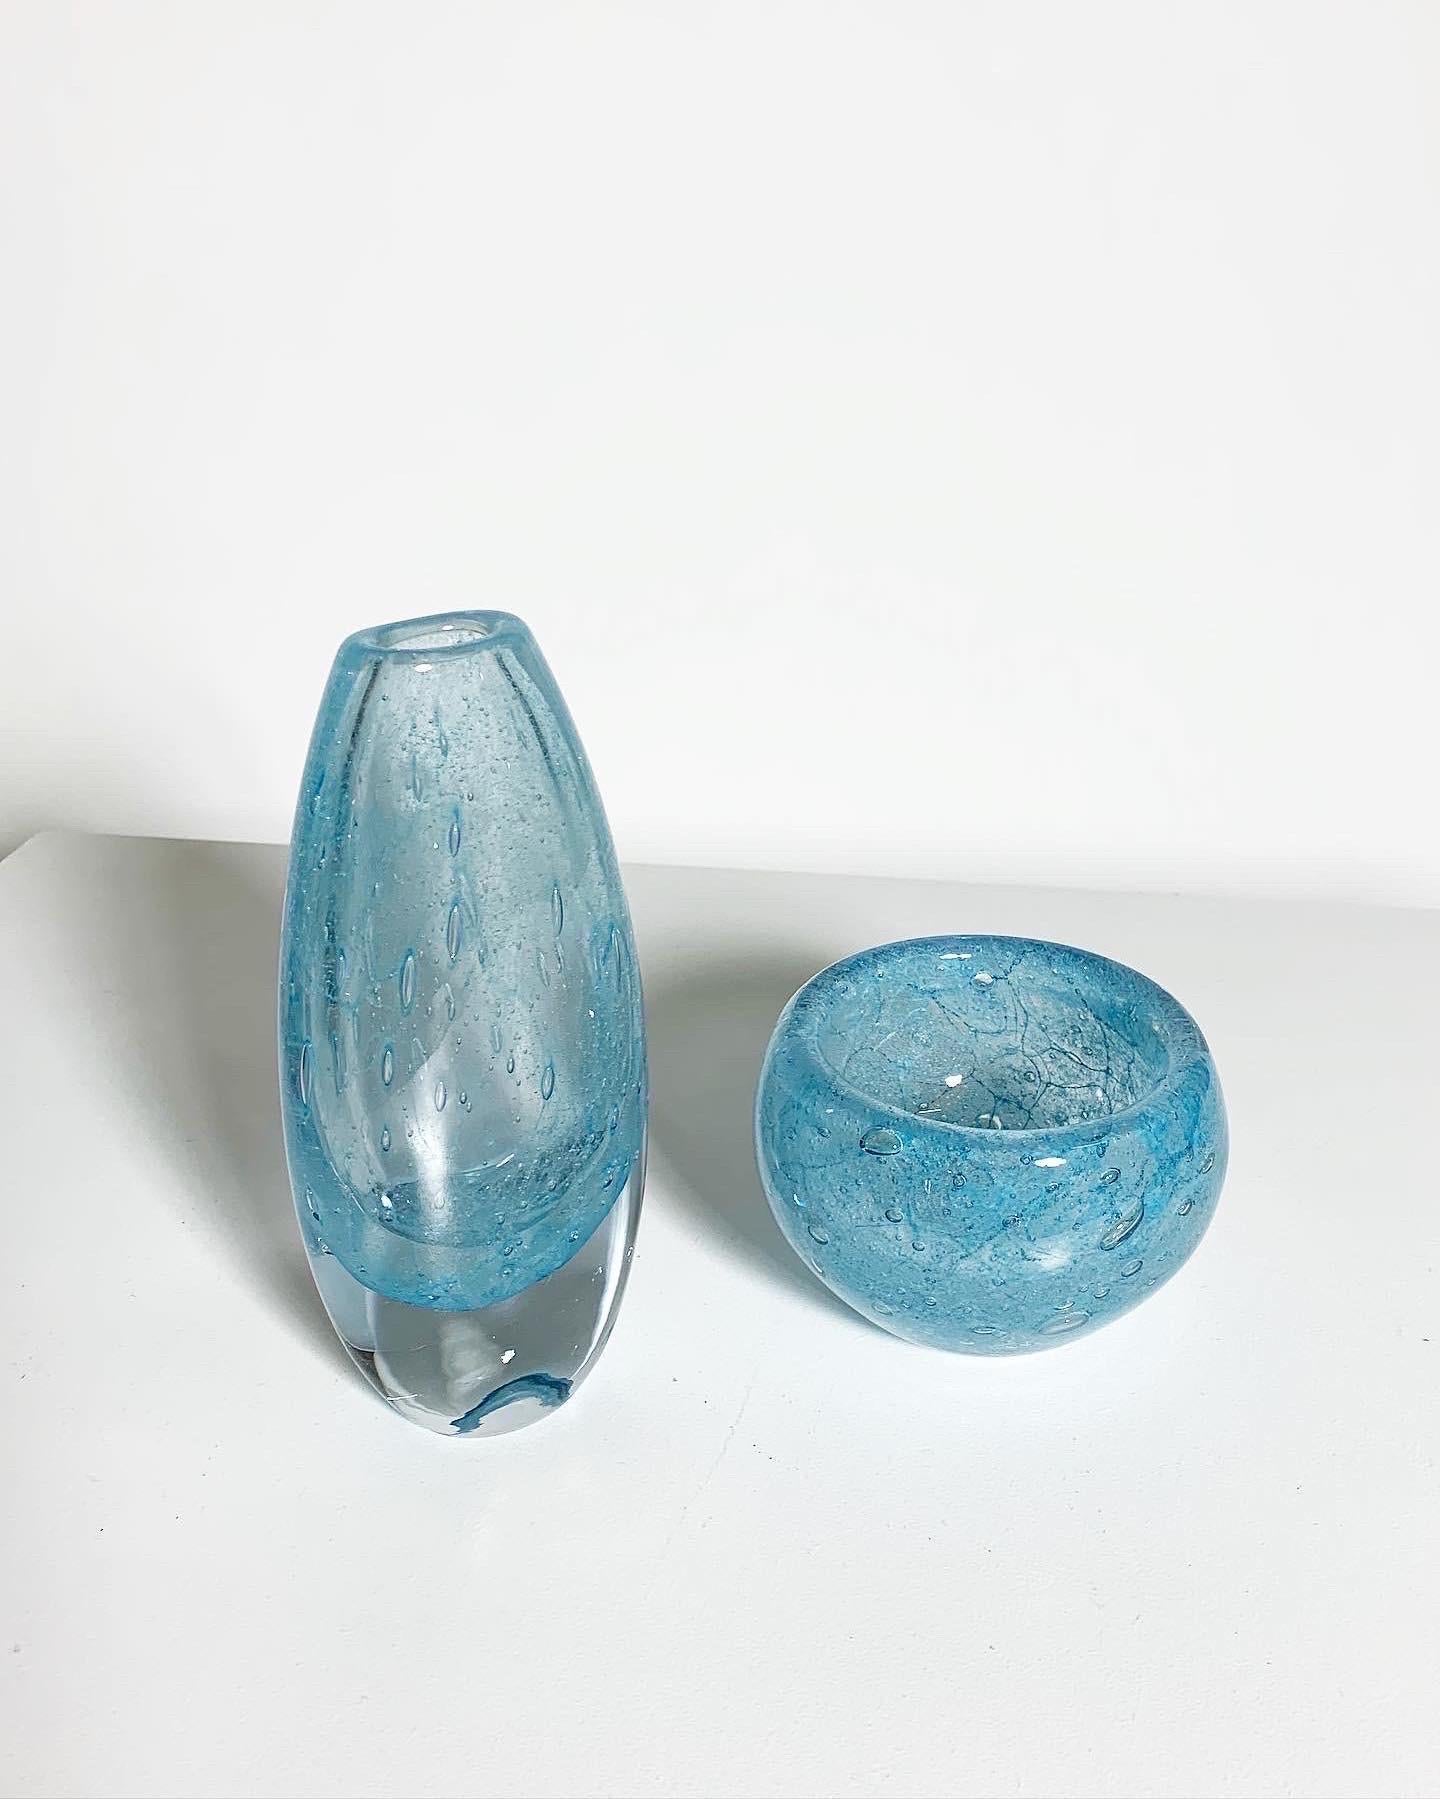 The shape of these two models were designed by Gunnar Nylund for Strömbergshyttan in Sweden, however the blue bubble technique was developed by Asta Strömberg and introduced by Strömbergshyttan in the early 1970s.

Vase
Height: 21.5 cm
Width: 9